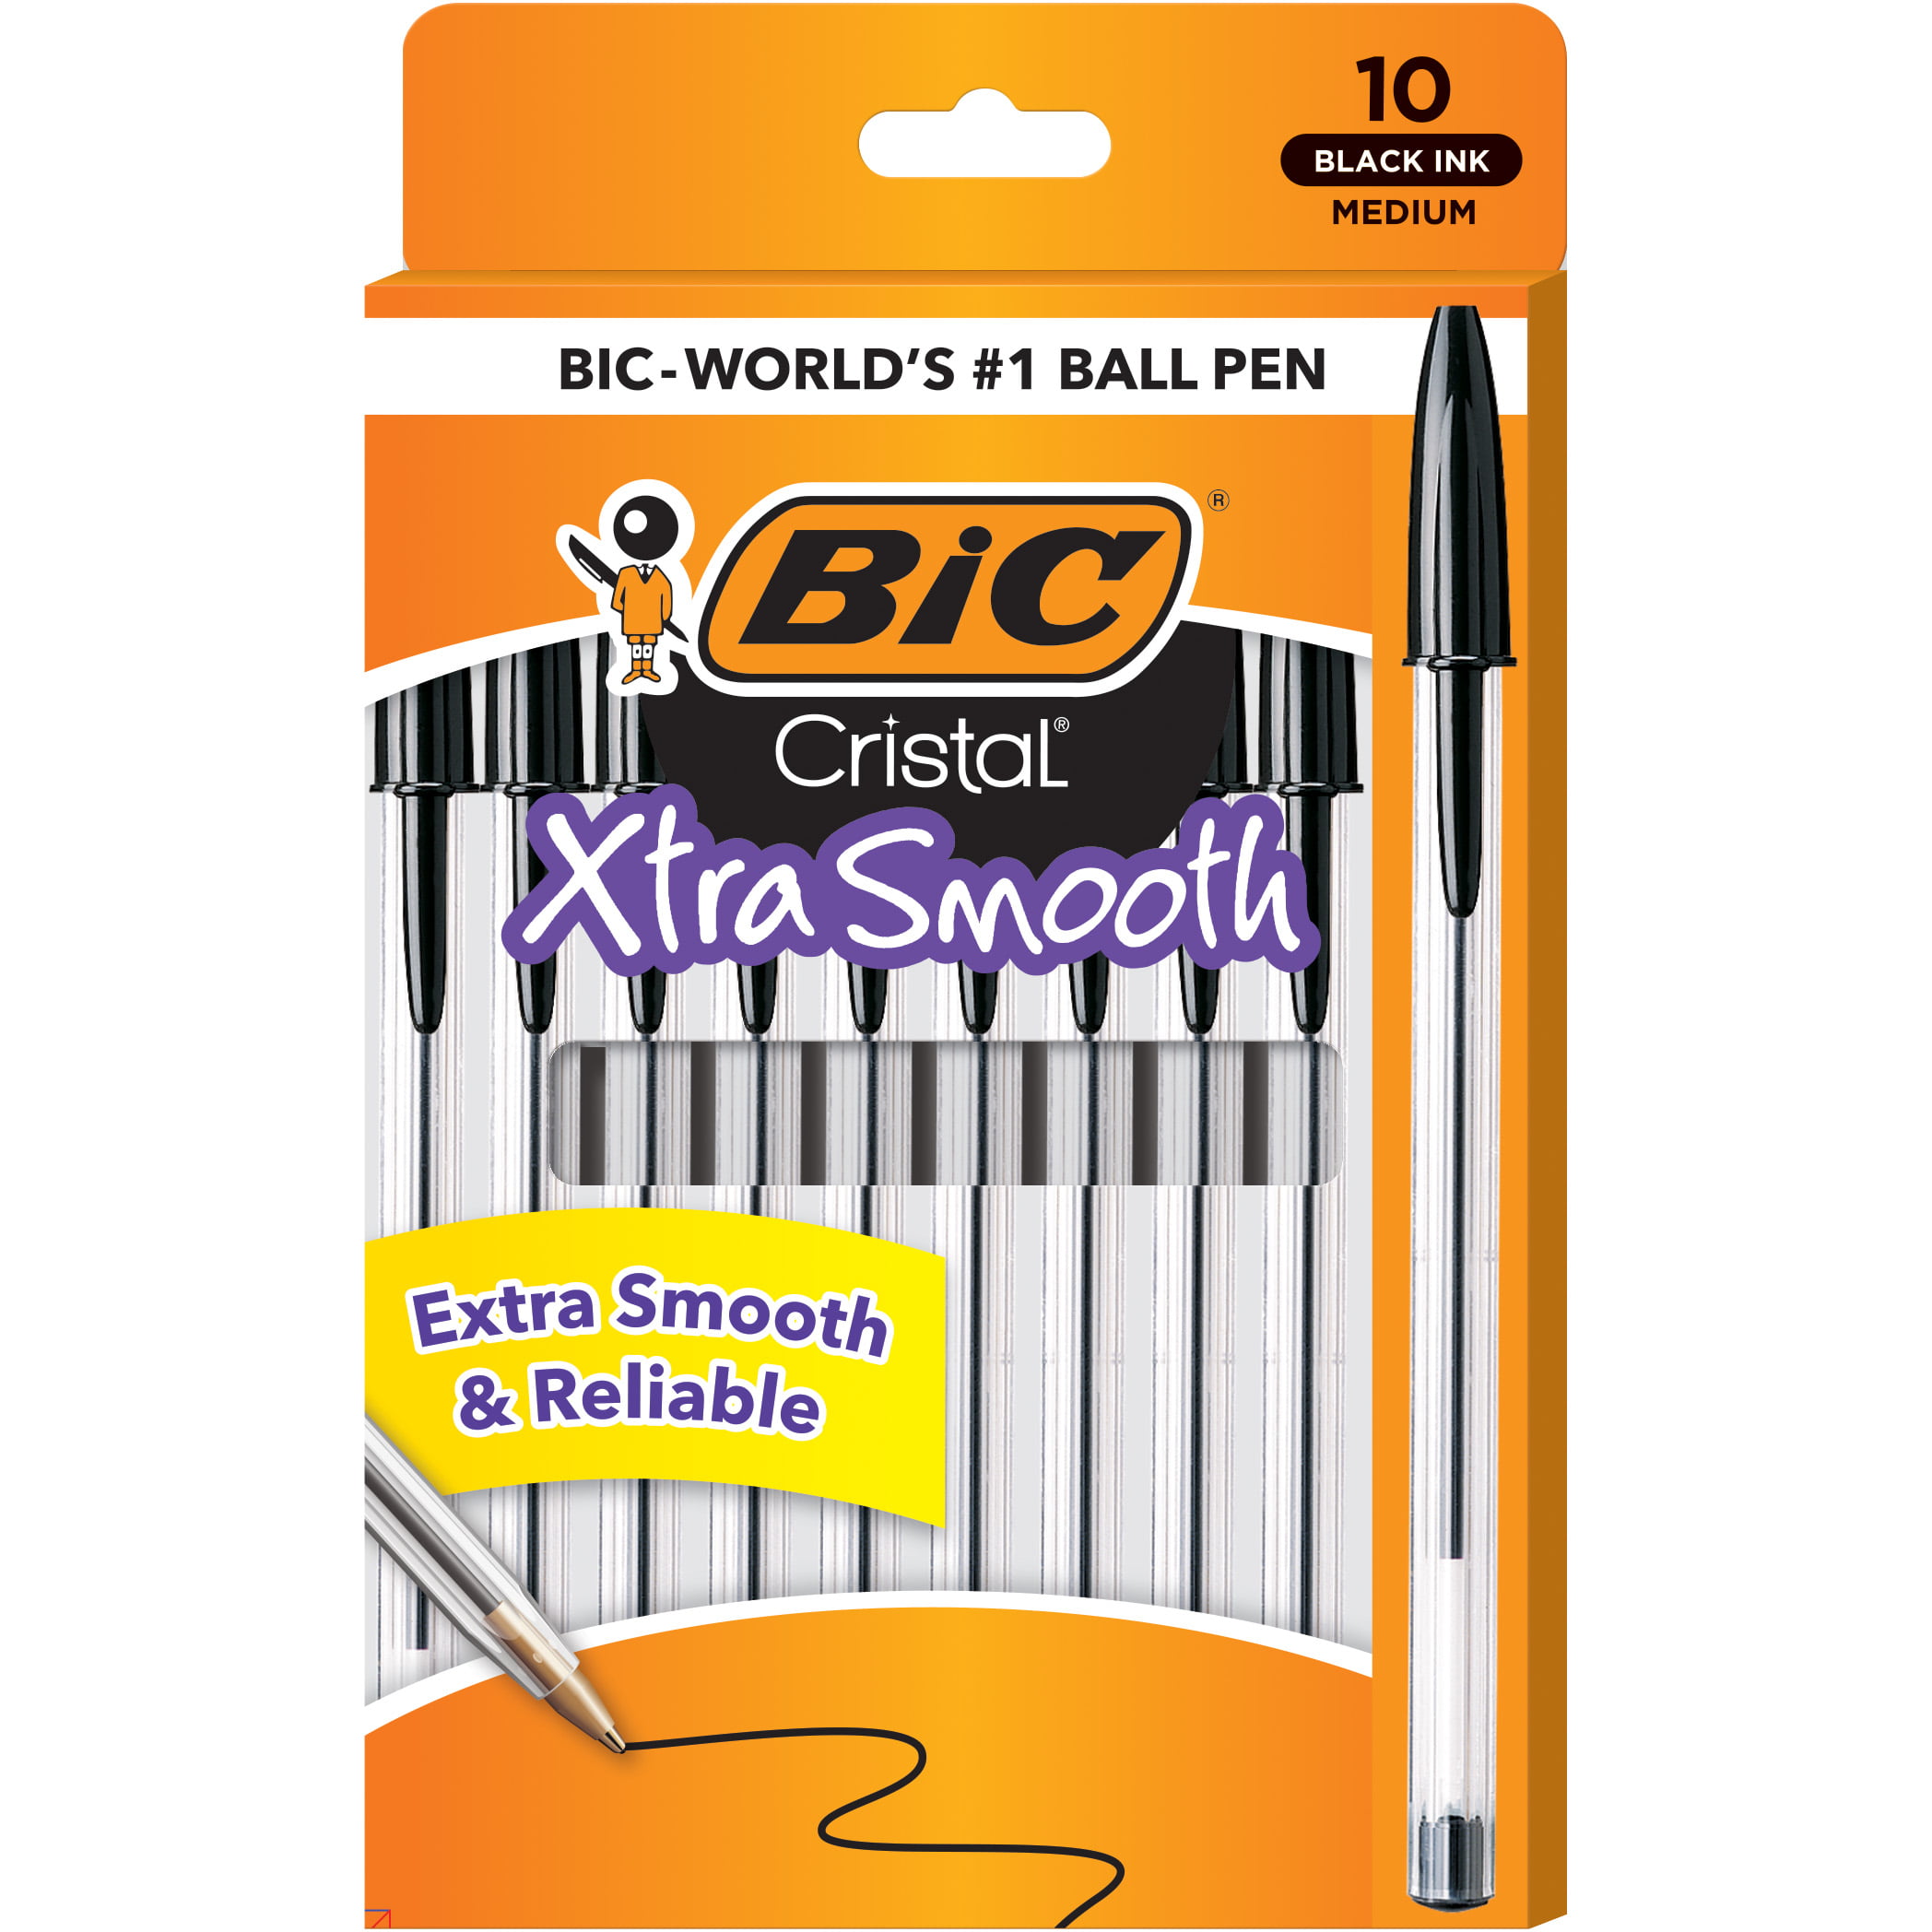 BIC Cristal Xtra Smooth Ballpoint Stick Pens, 1.0 mm, Black Ink, Pack of 10 - image 1 of 7